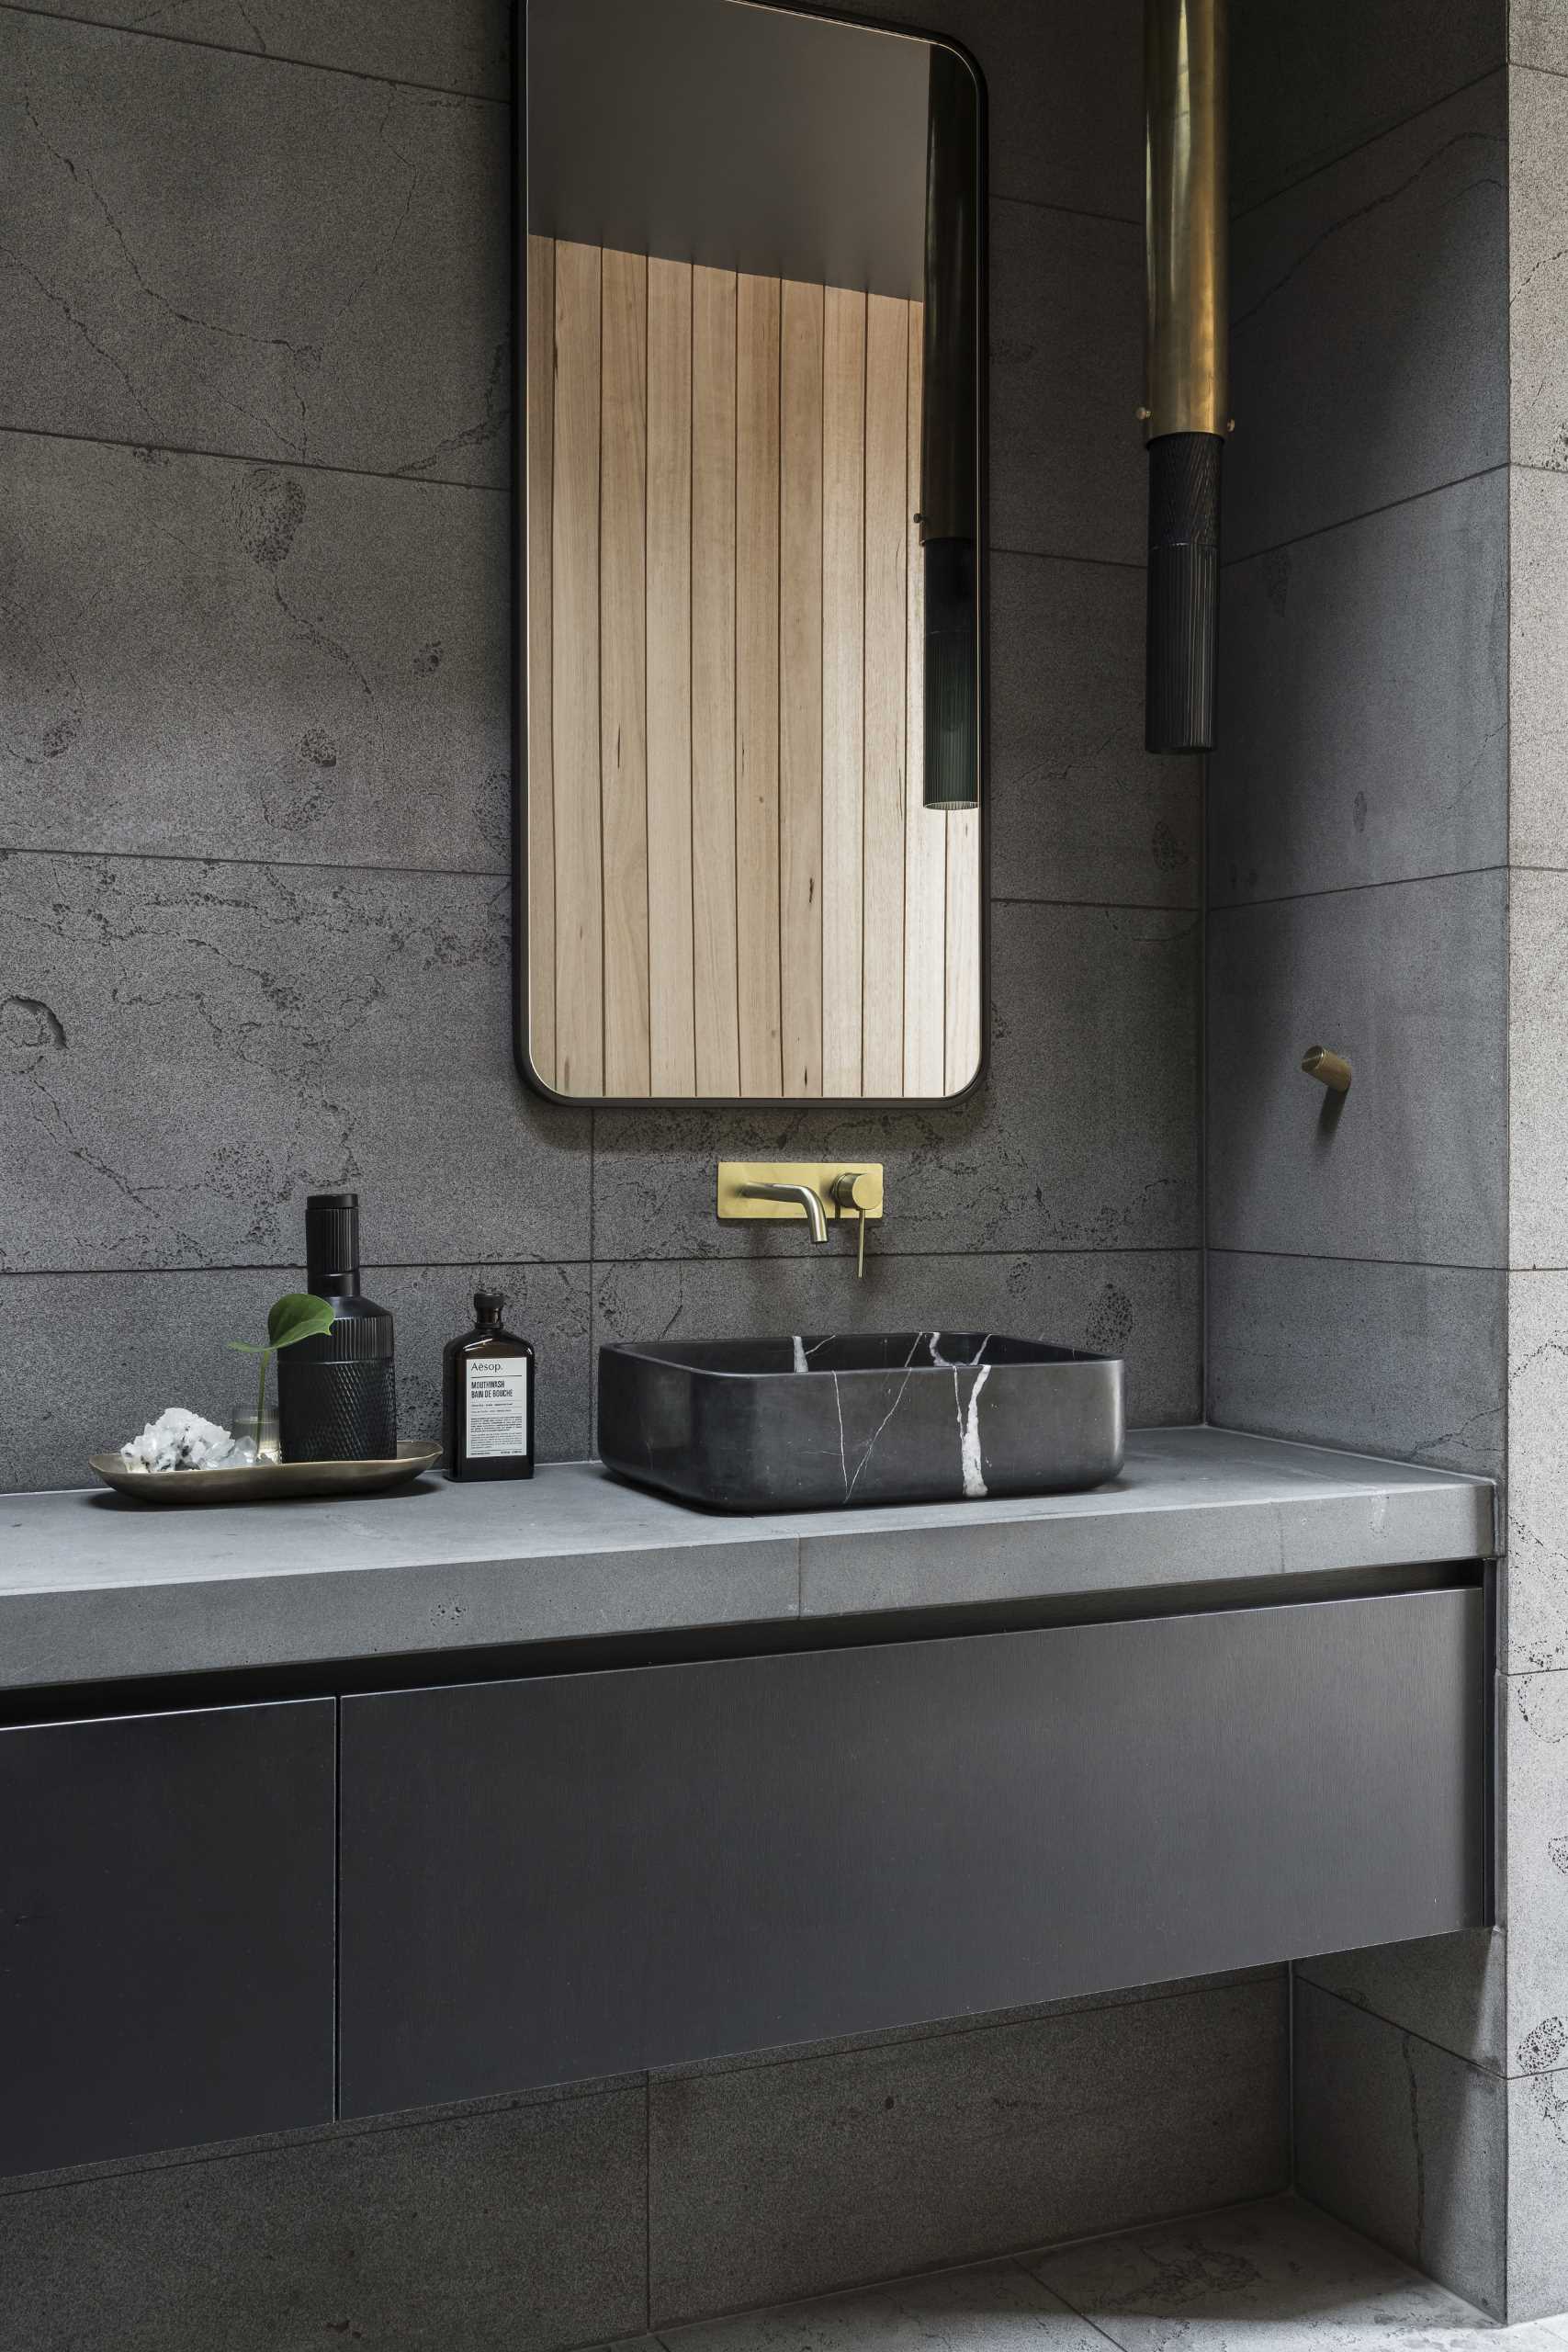 This modern bathroom features a floating black vanity, a skylight, and vertical wood accent walls.